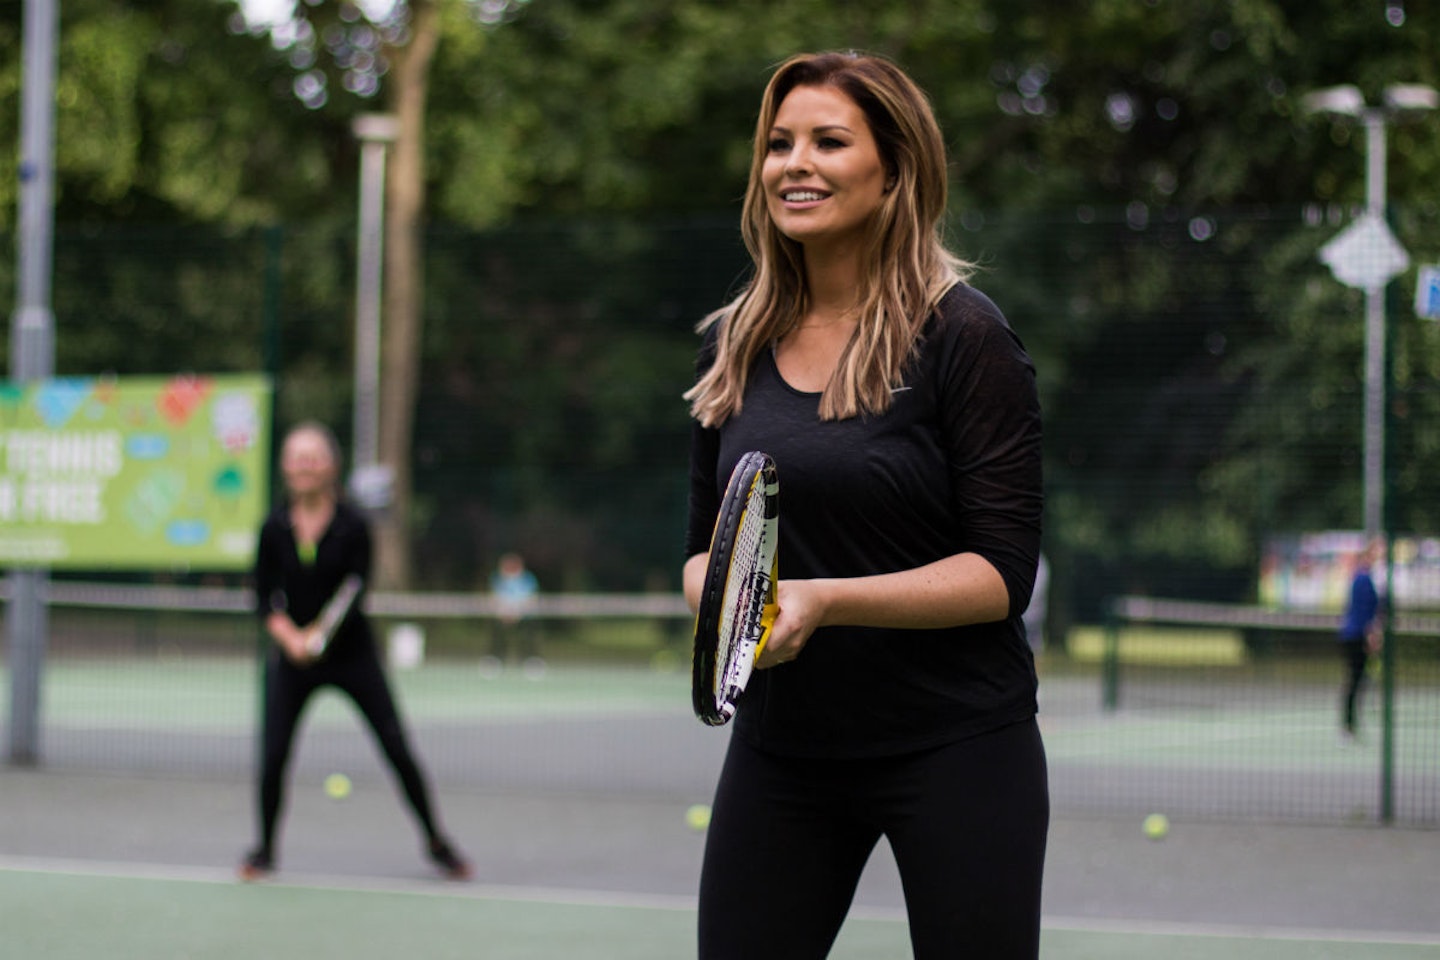 Jess Wright has been taking part in Tennis Tuesdays